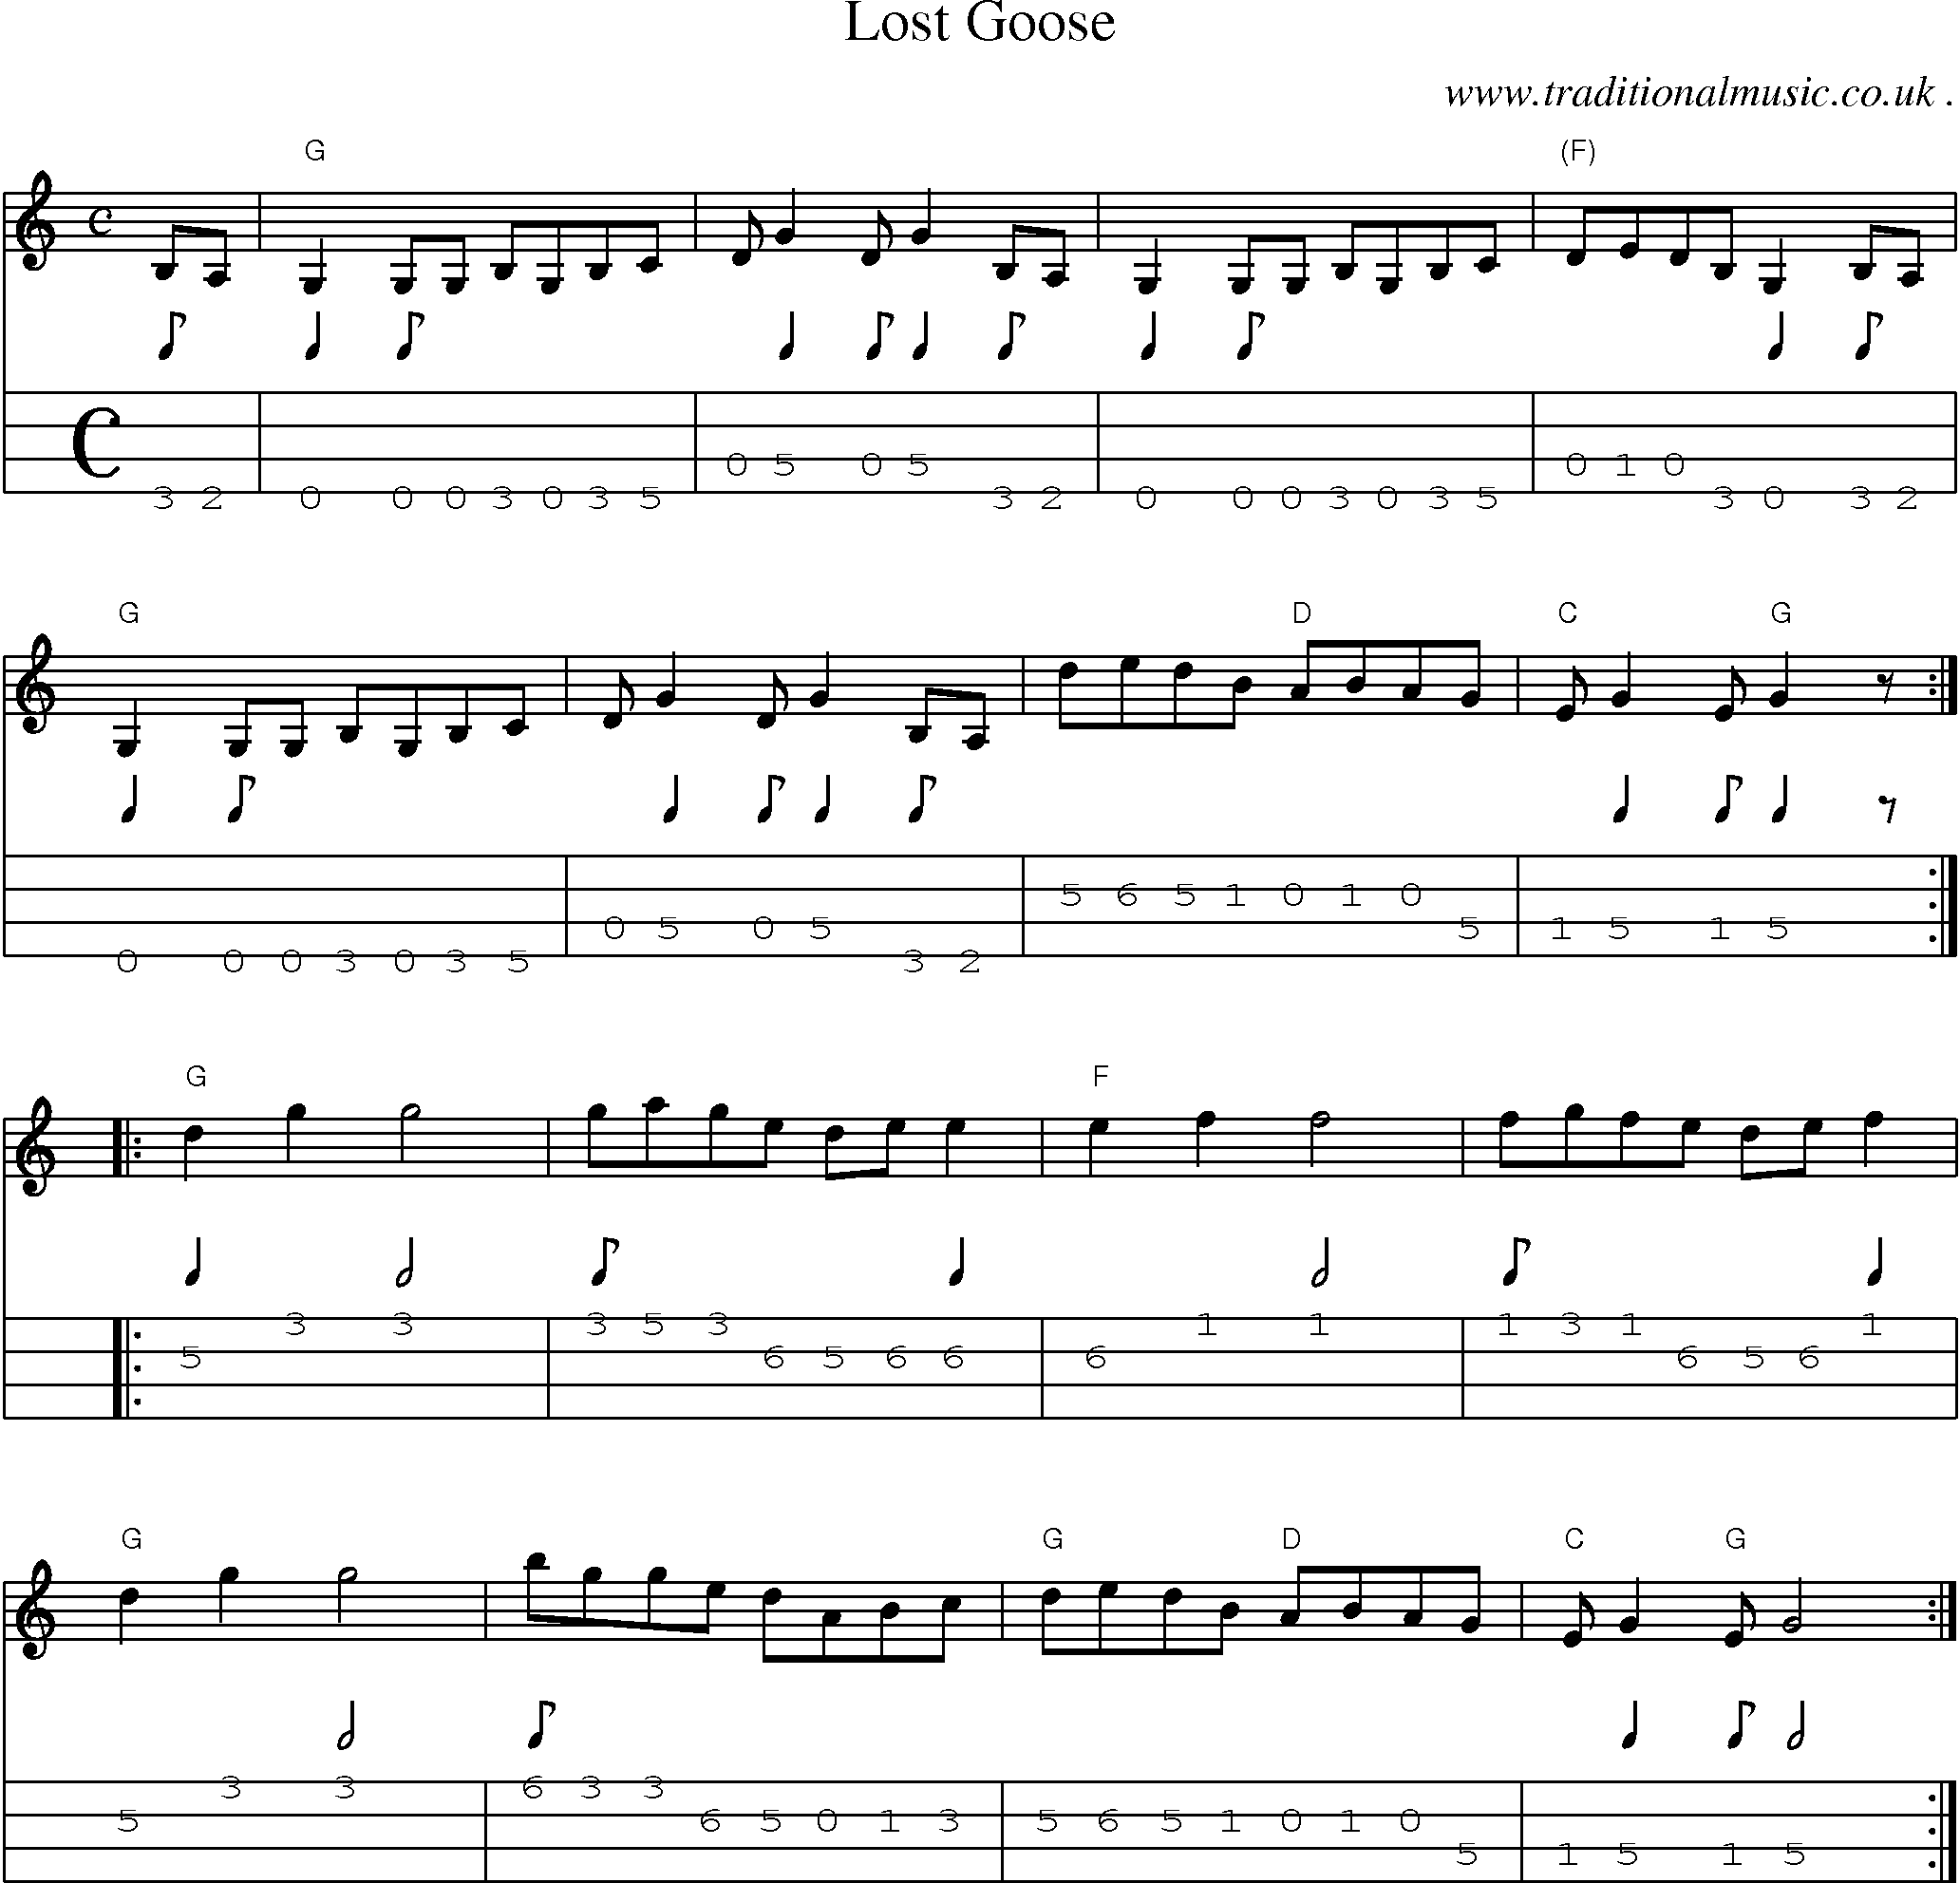 Music Score and Guitar Tabs for Lost Goose